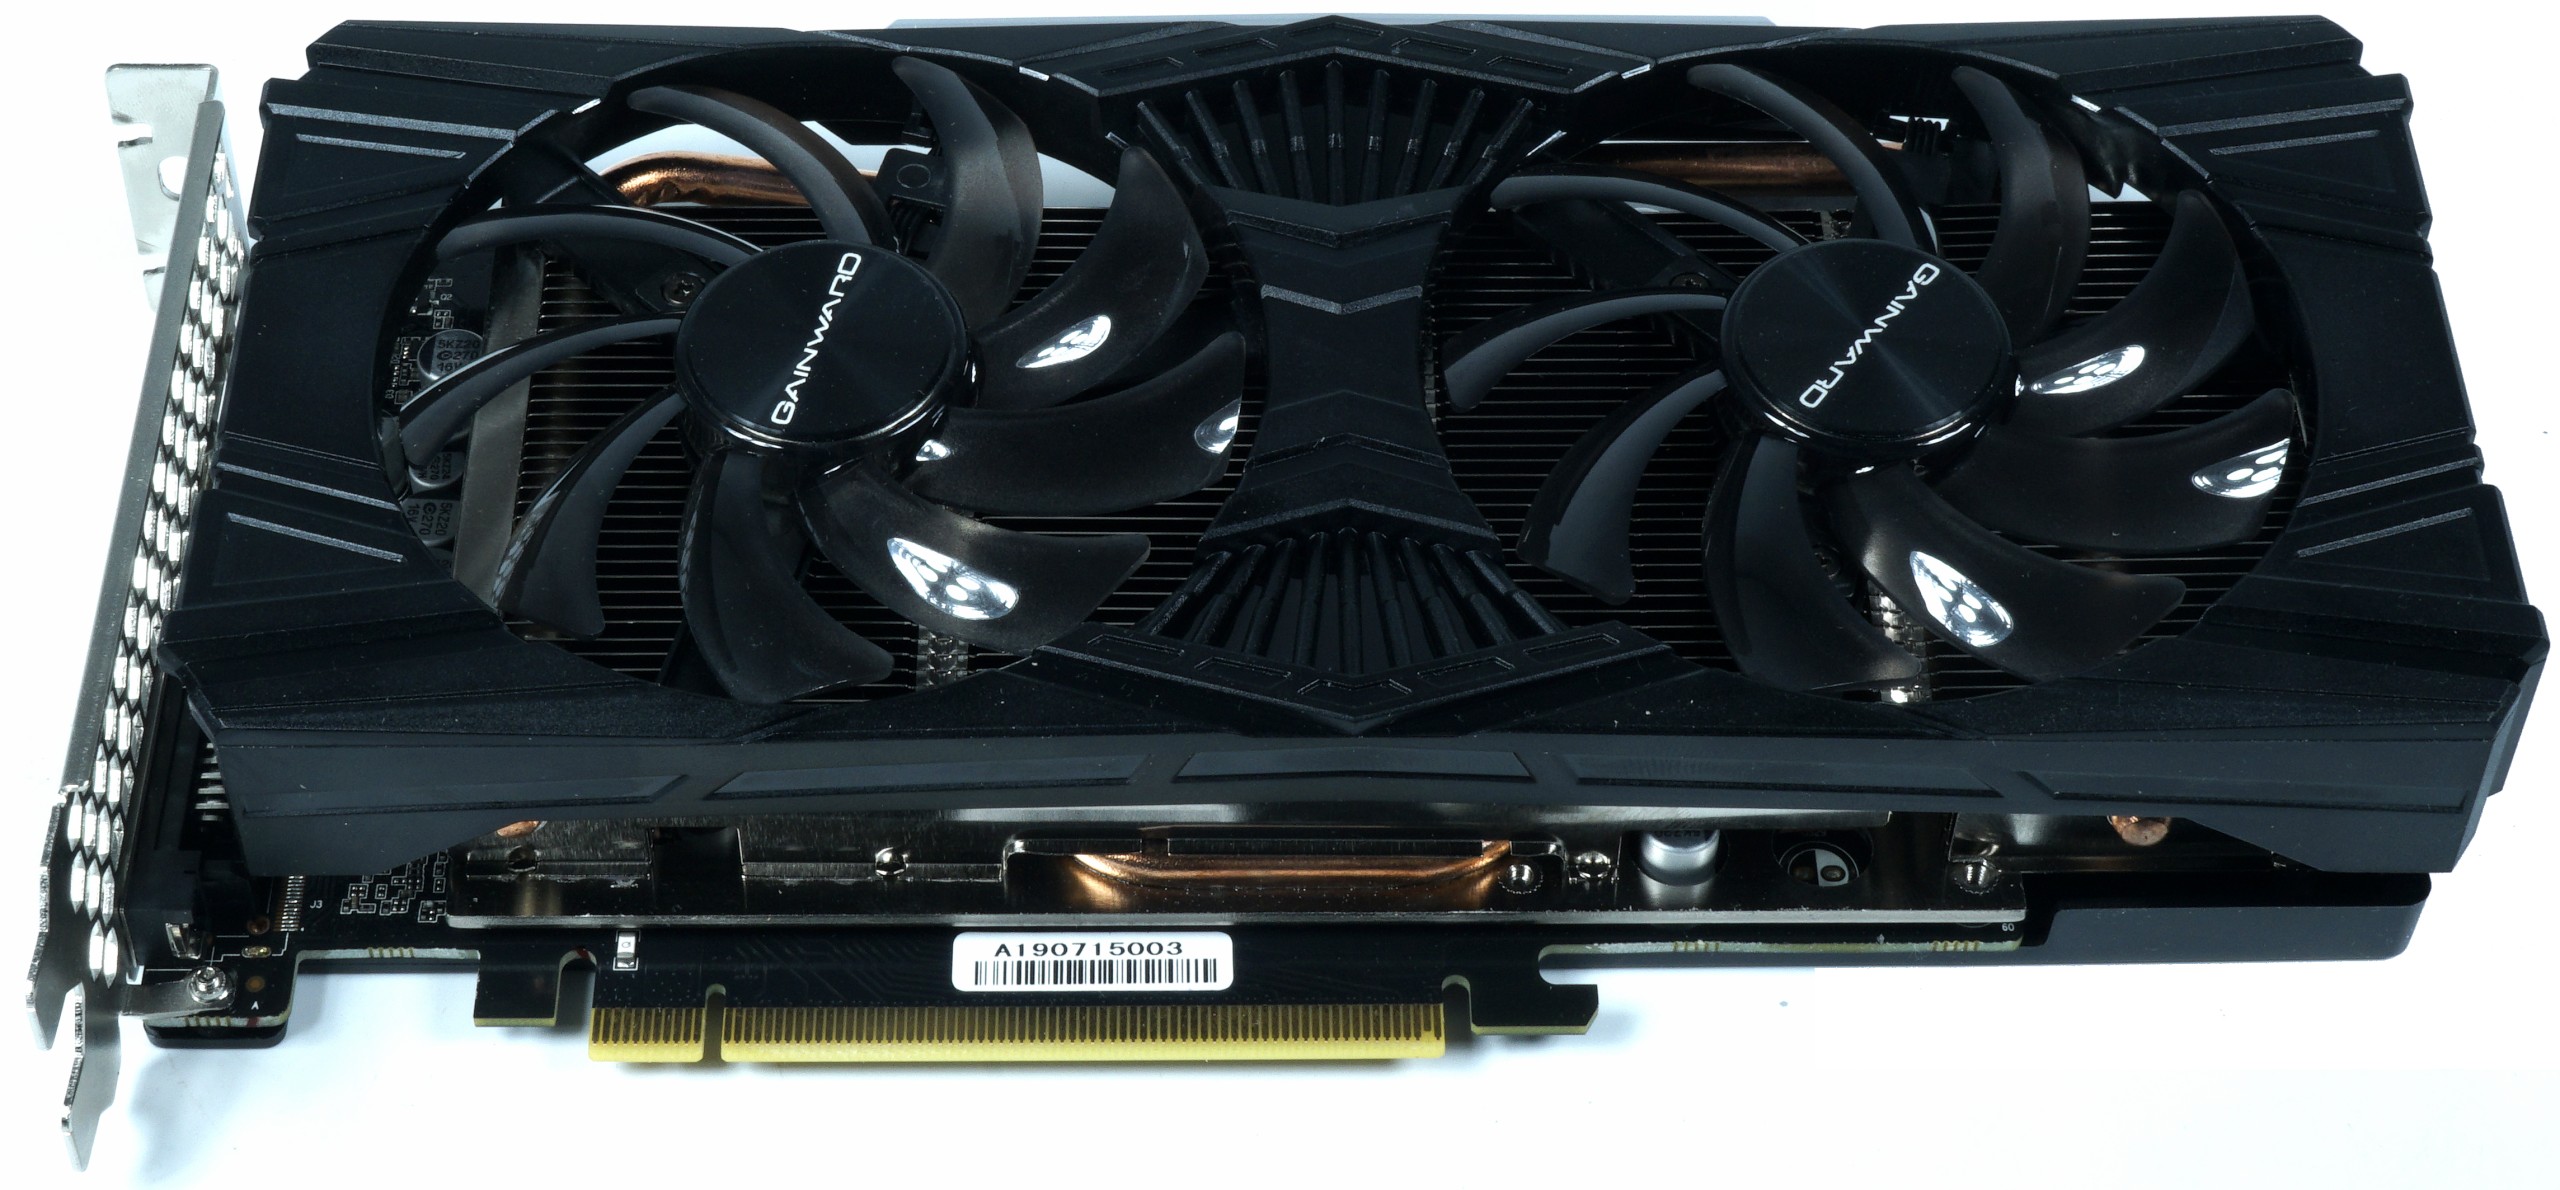 Gainward GeForce RTX 2060 Super Ghost 8 GB review - How good is